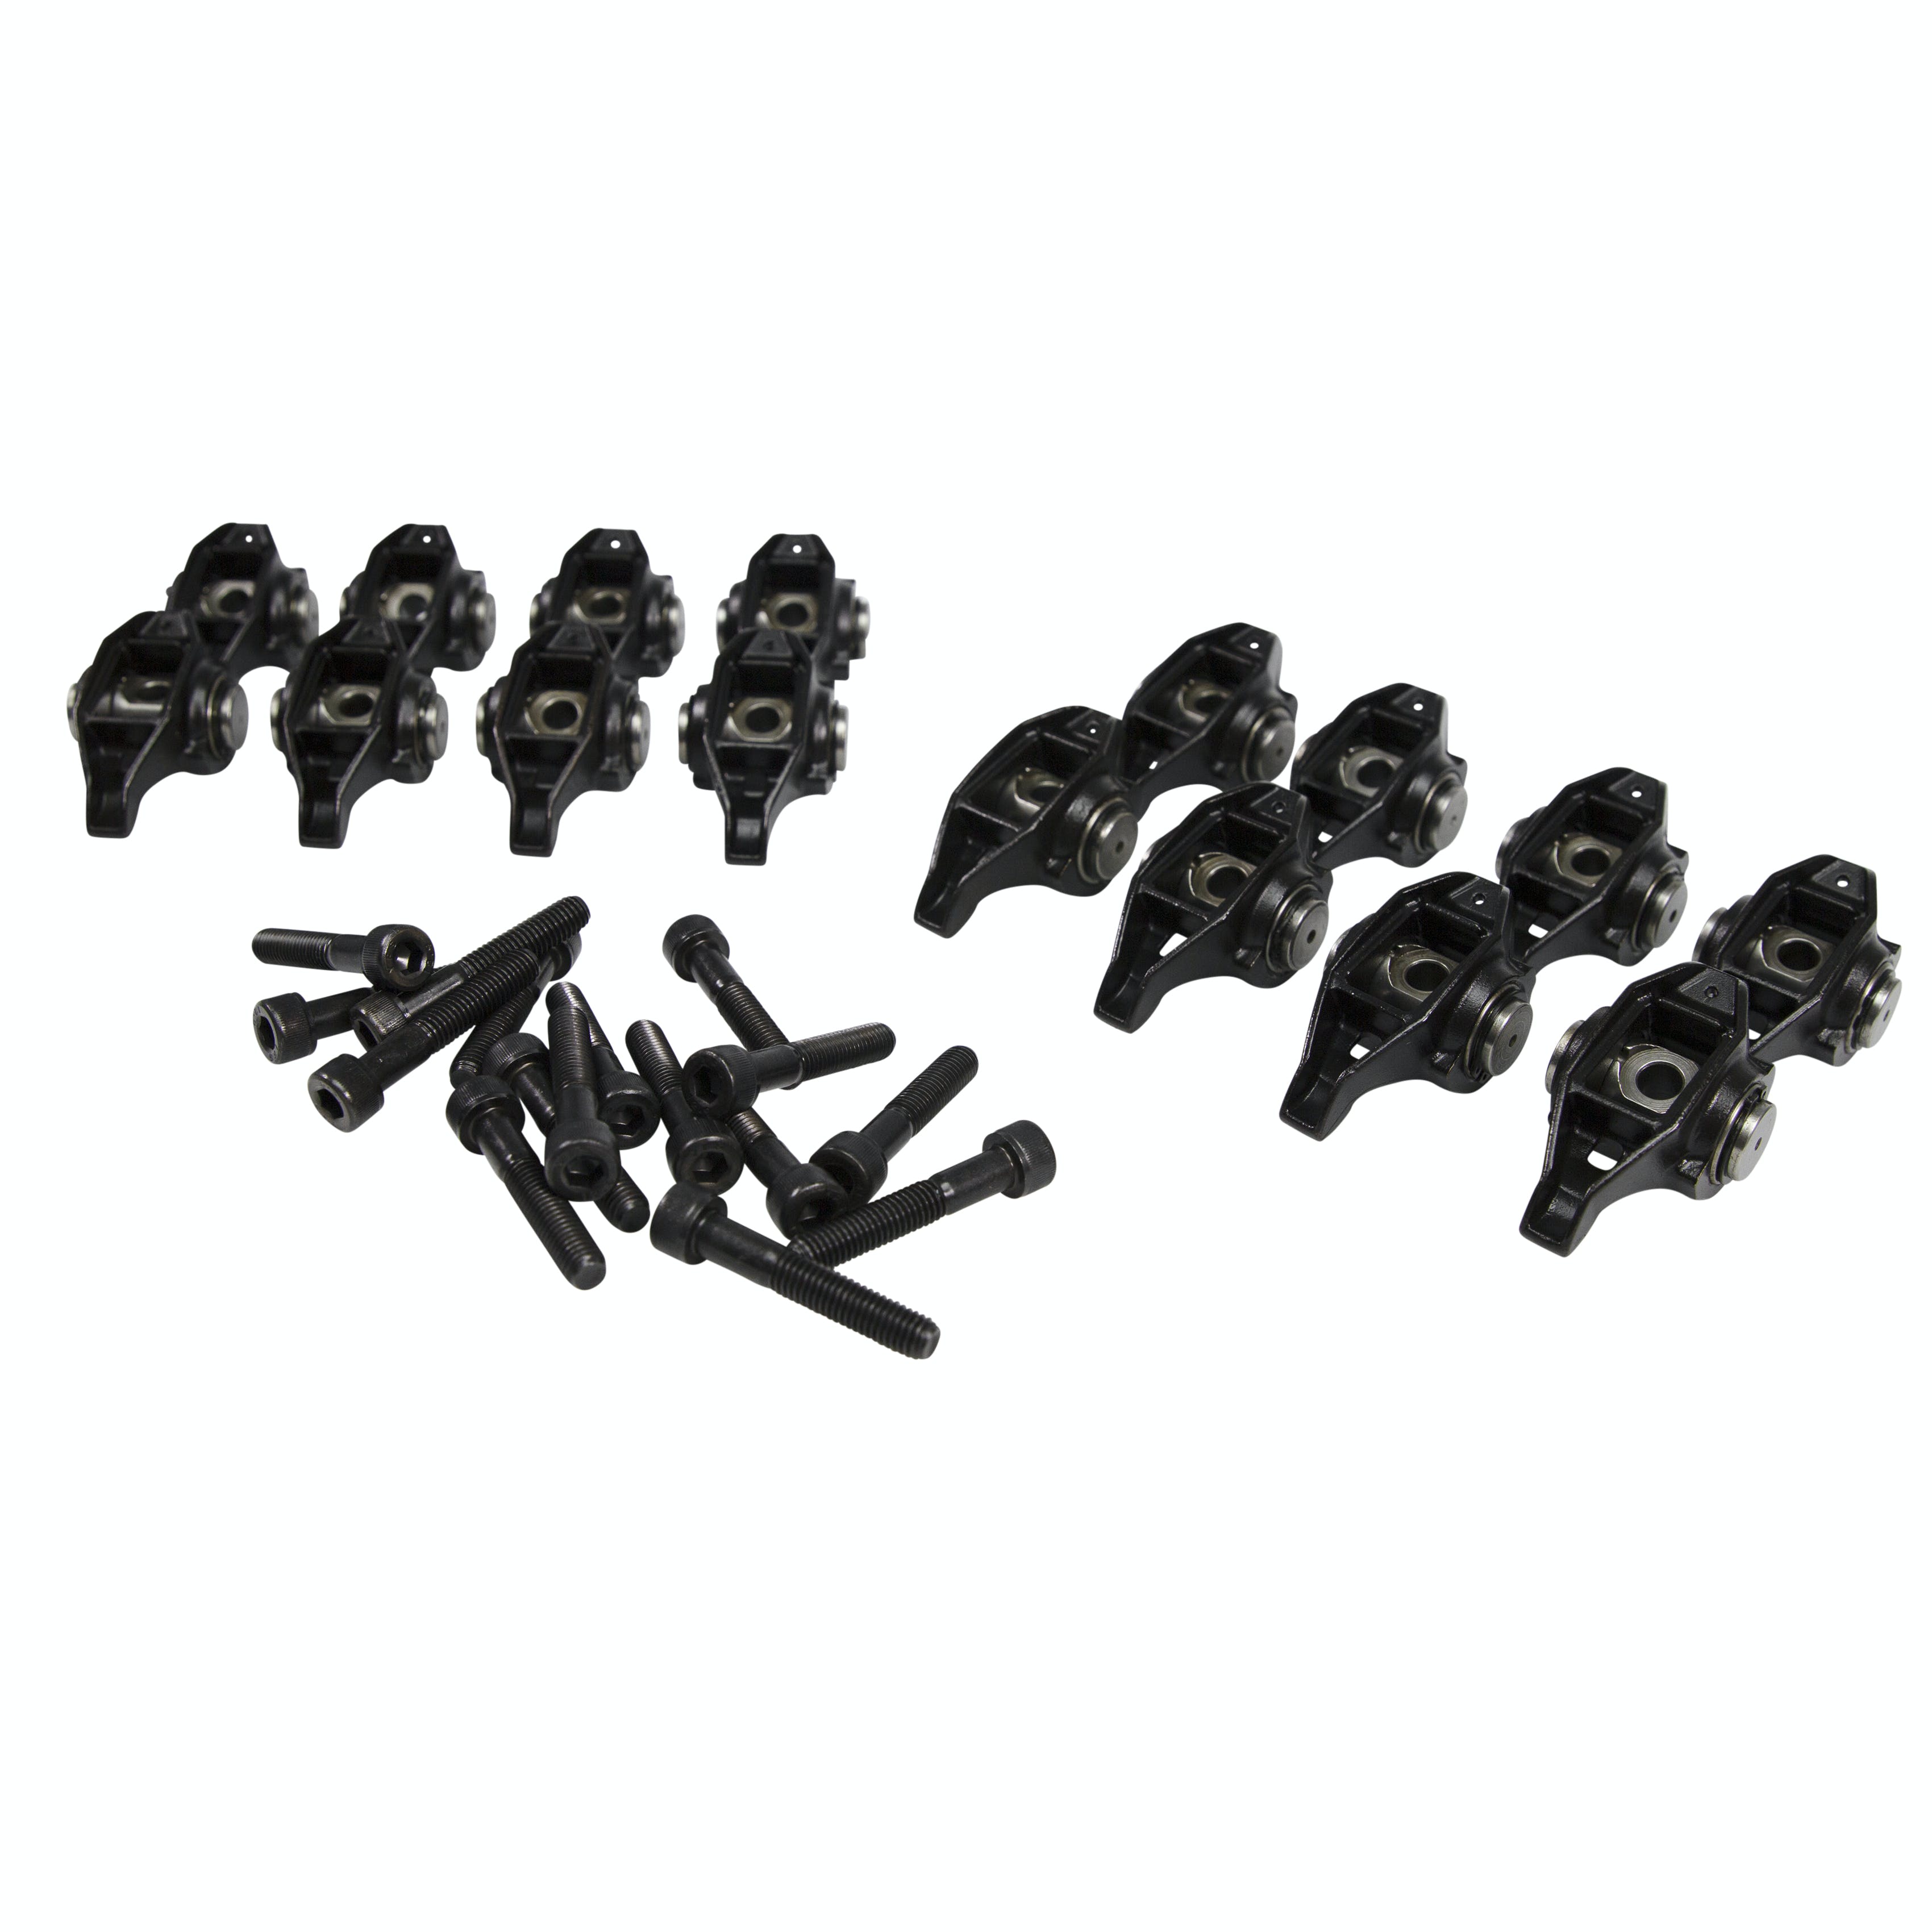 Competition Cams 1477-16 Trunnion-Upgraded 1.7 Ratio Rocker Arm Set for GM LS1